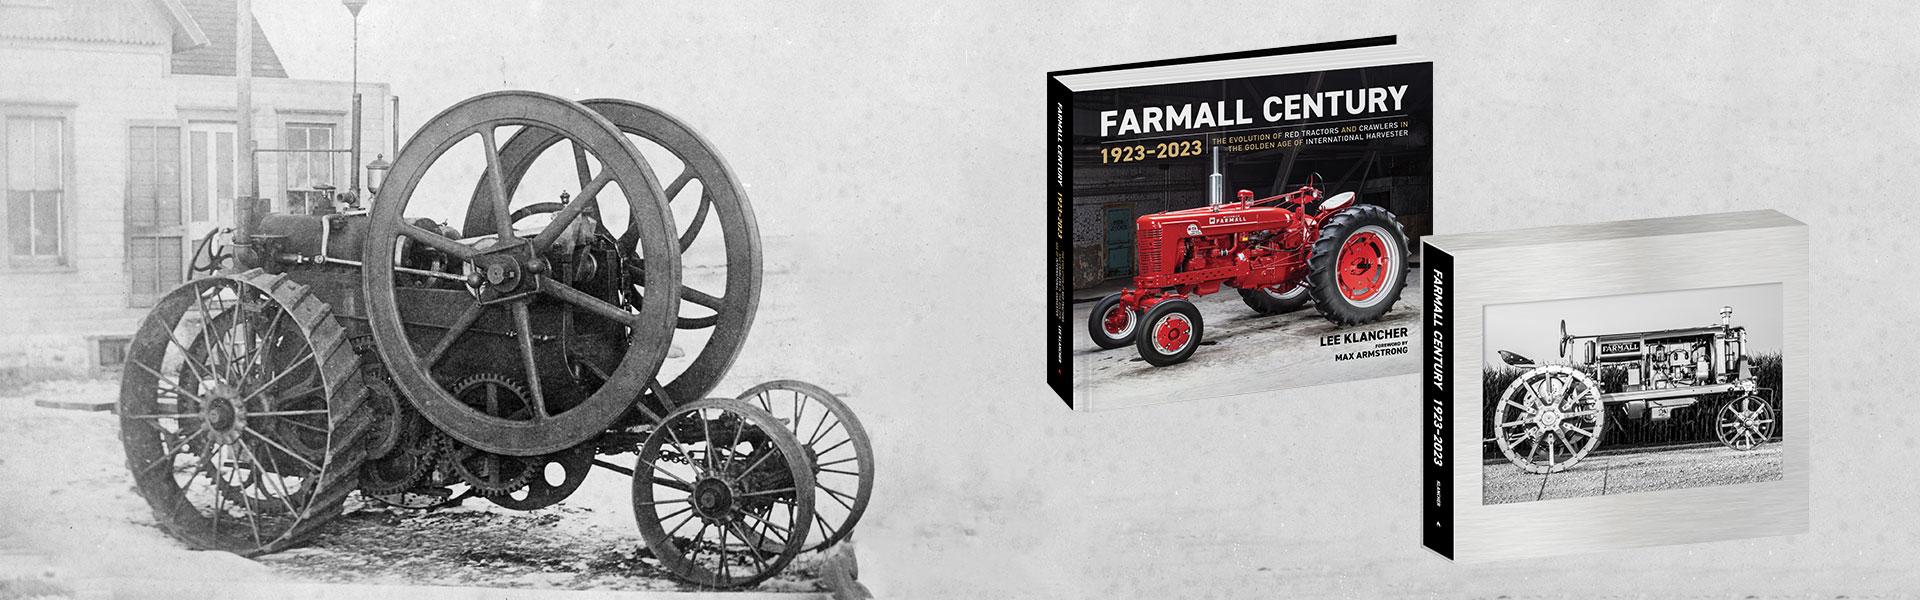 burger tractor with farmall century book covers